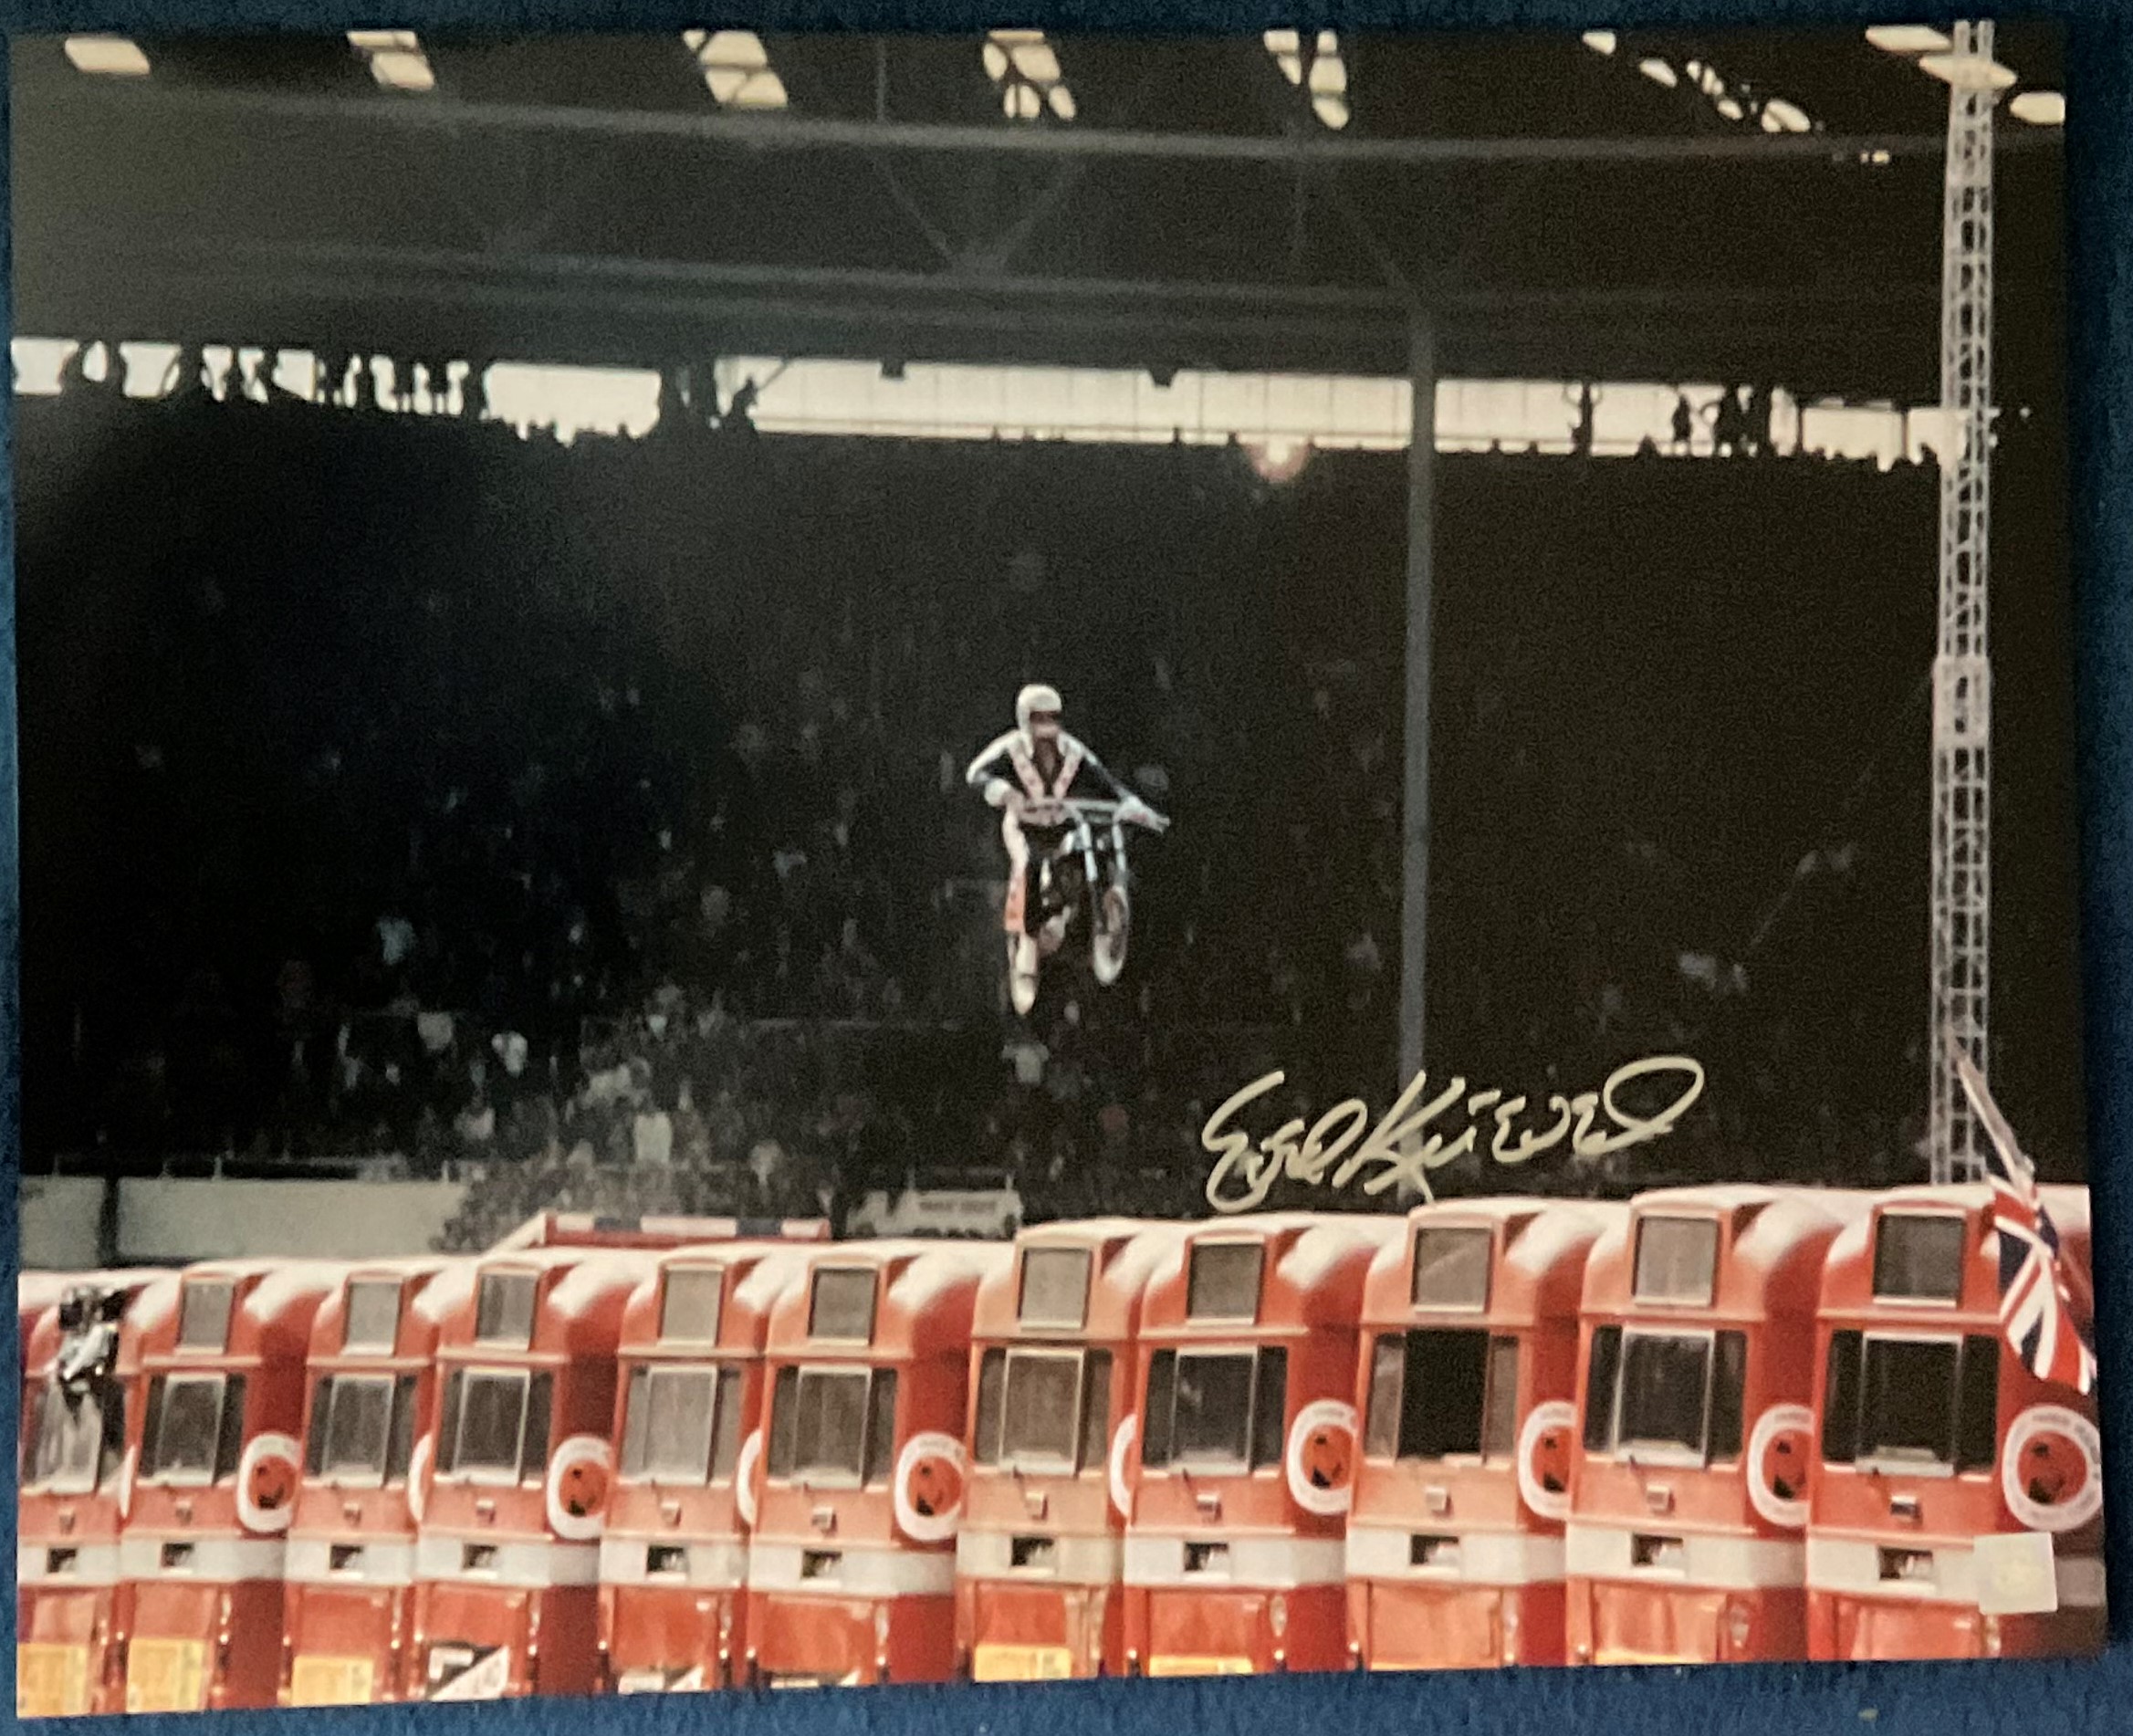 Evel Knievel signed 20x16 colour print pictured during his attempt to jump 13 London Buses at